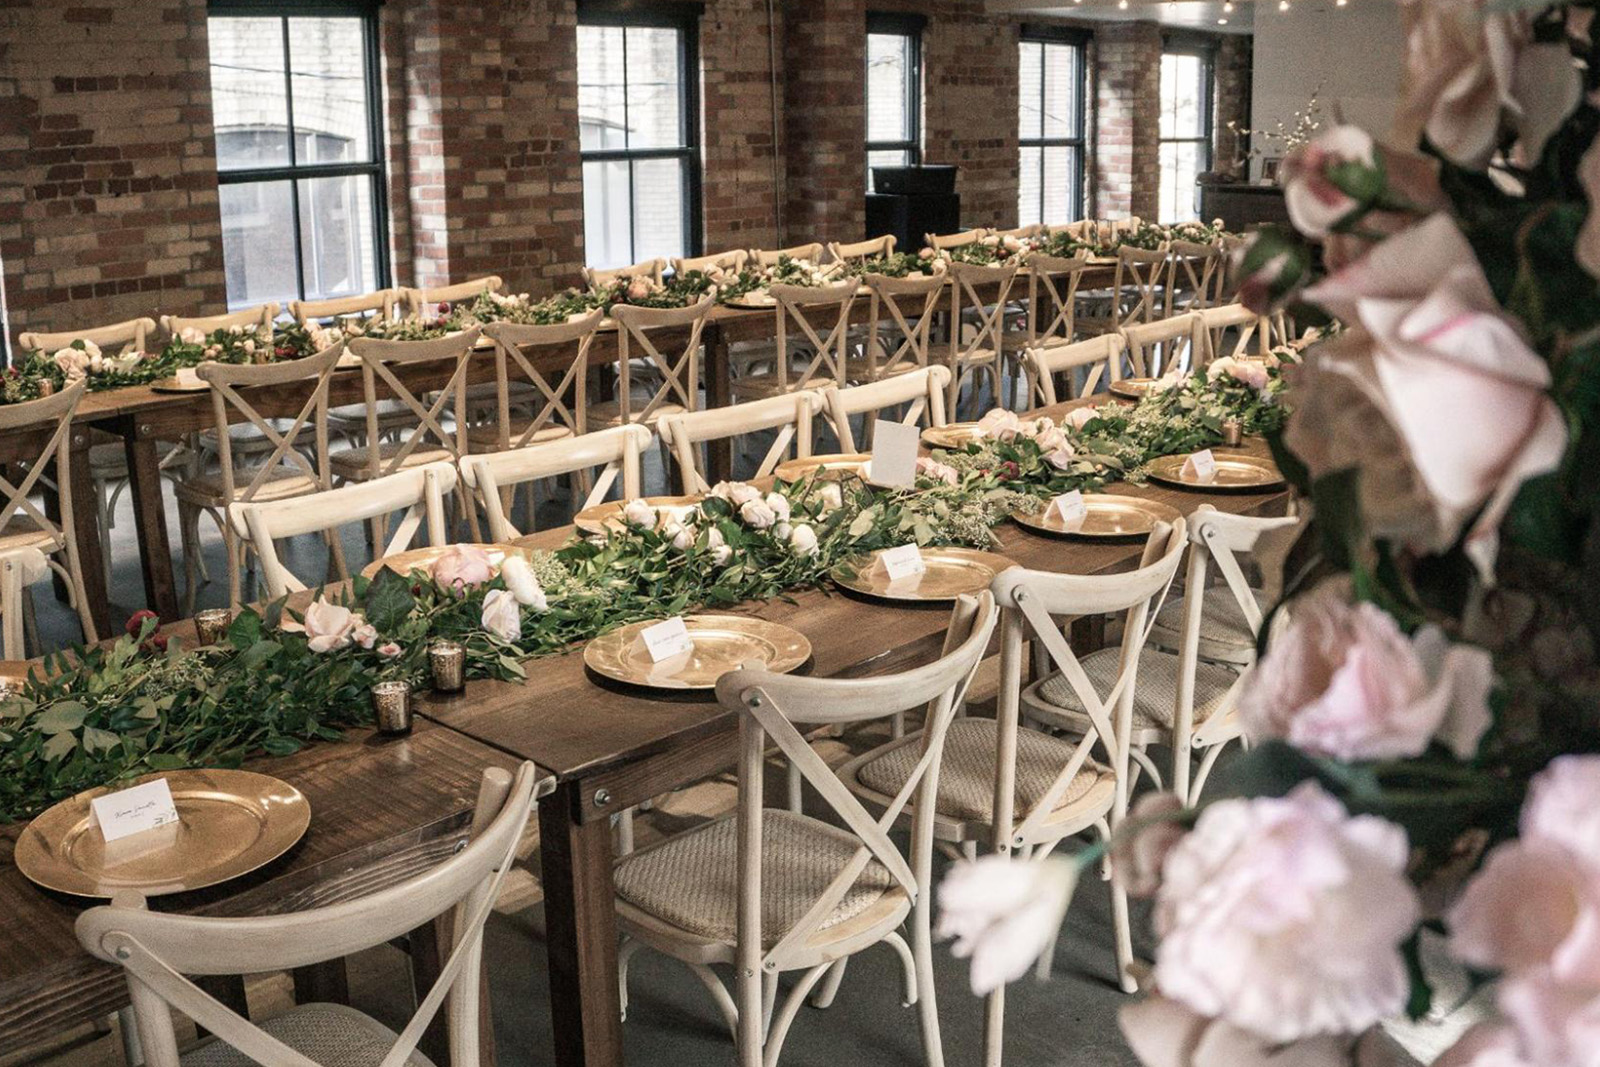  Dinner tables beautifully arranged and decorated for a wedding event at The Loft on King